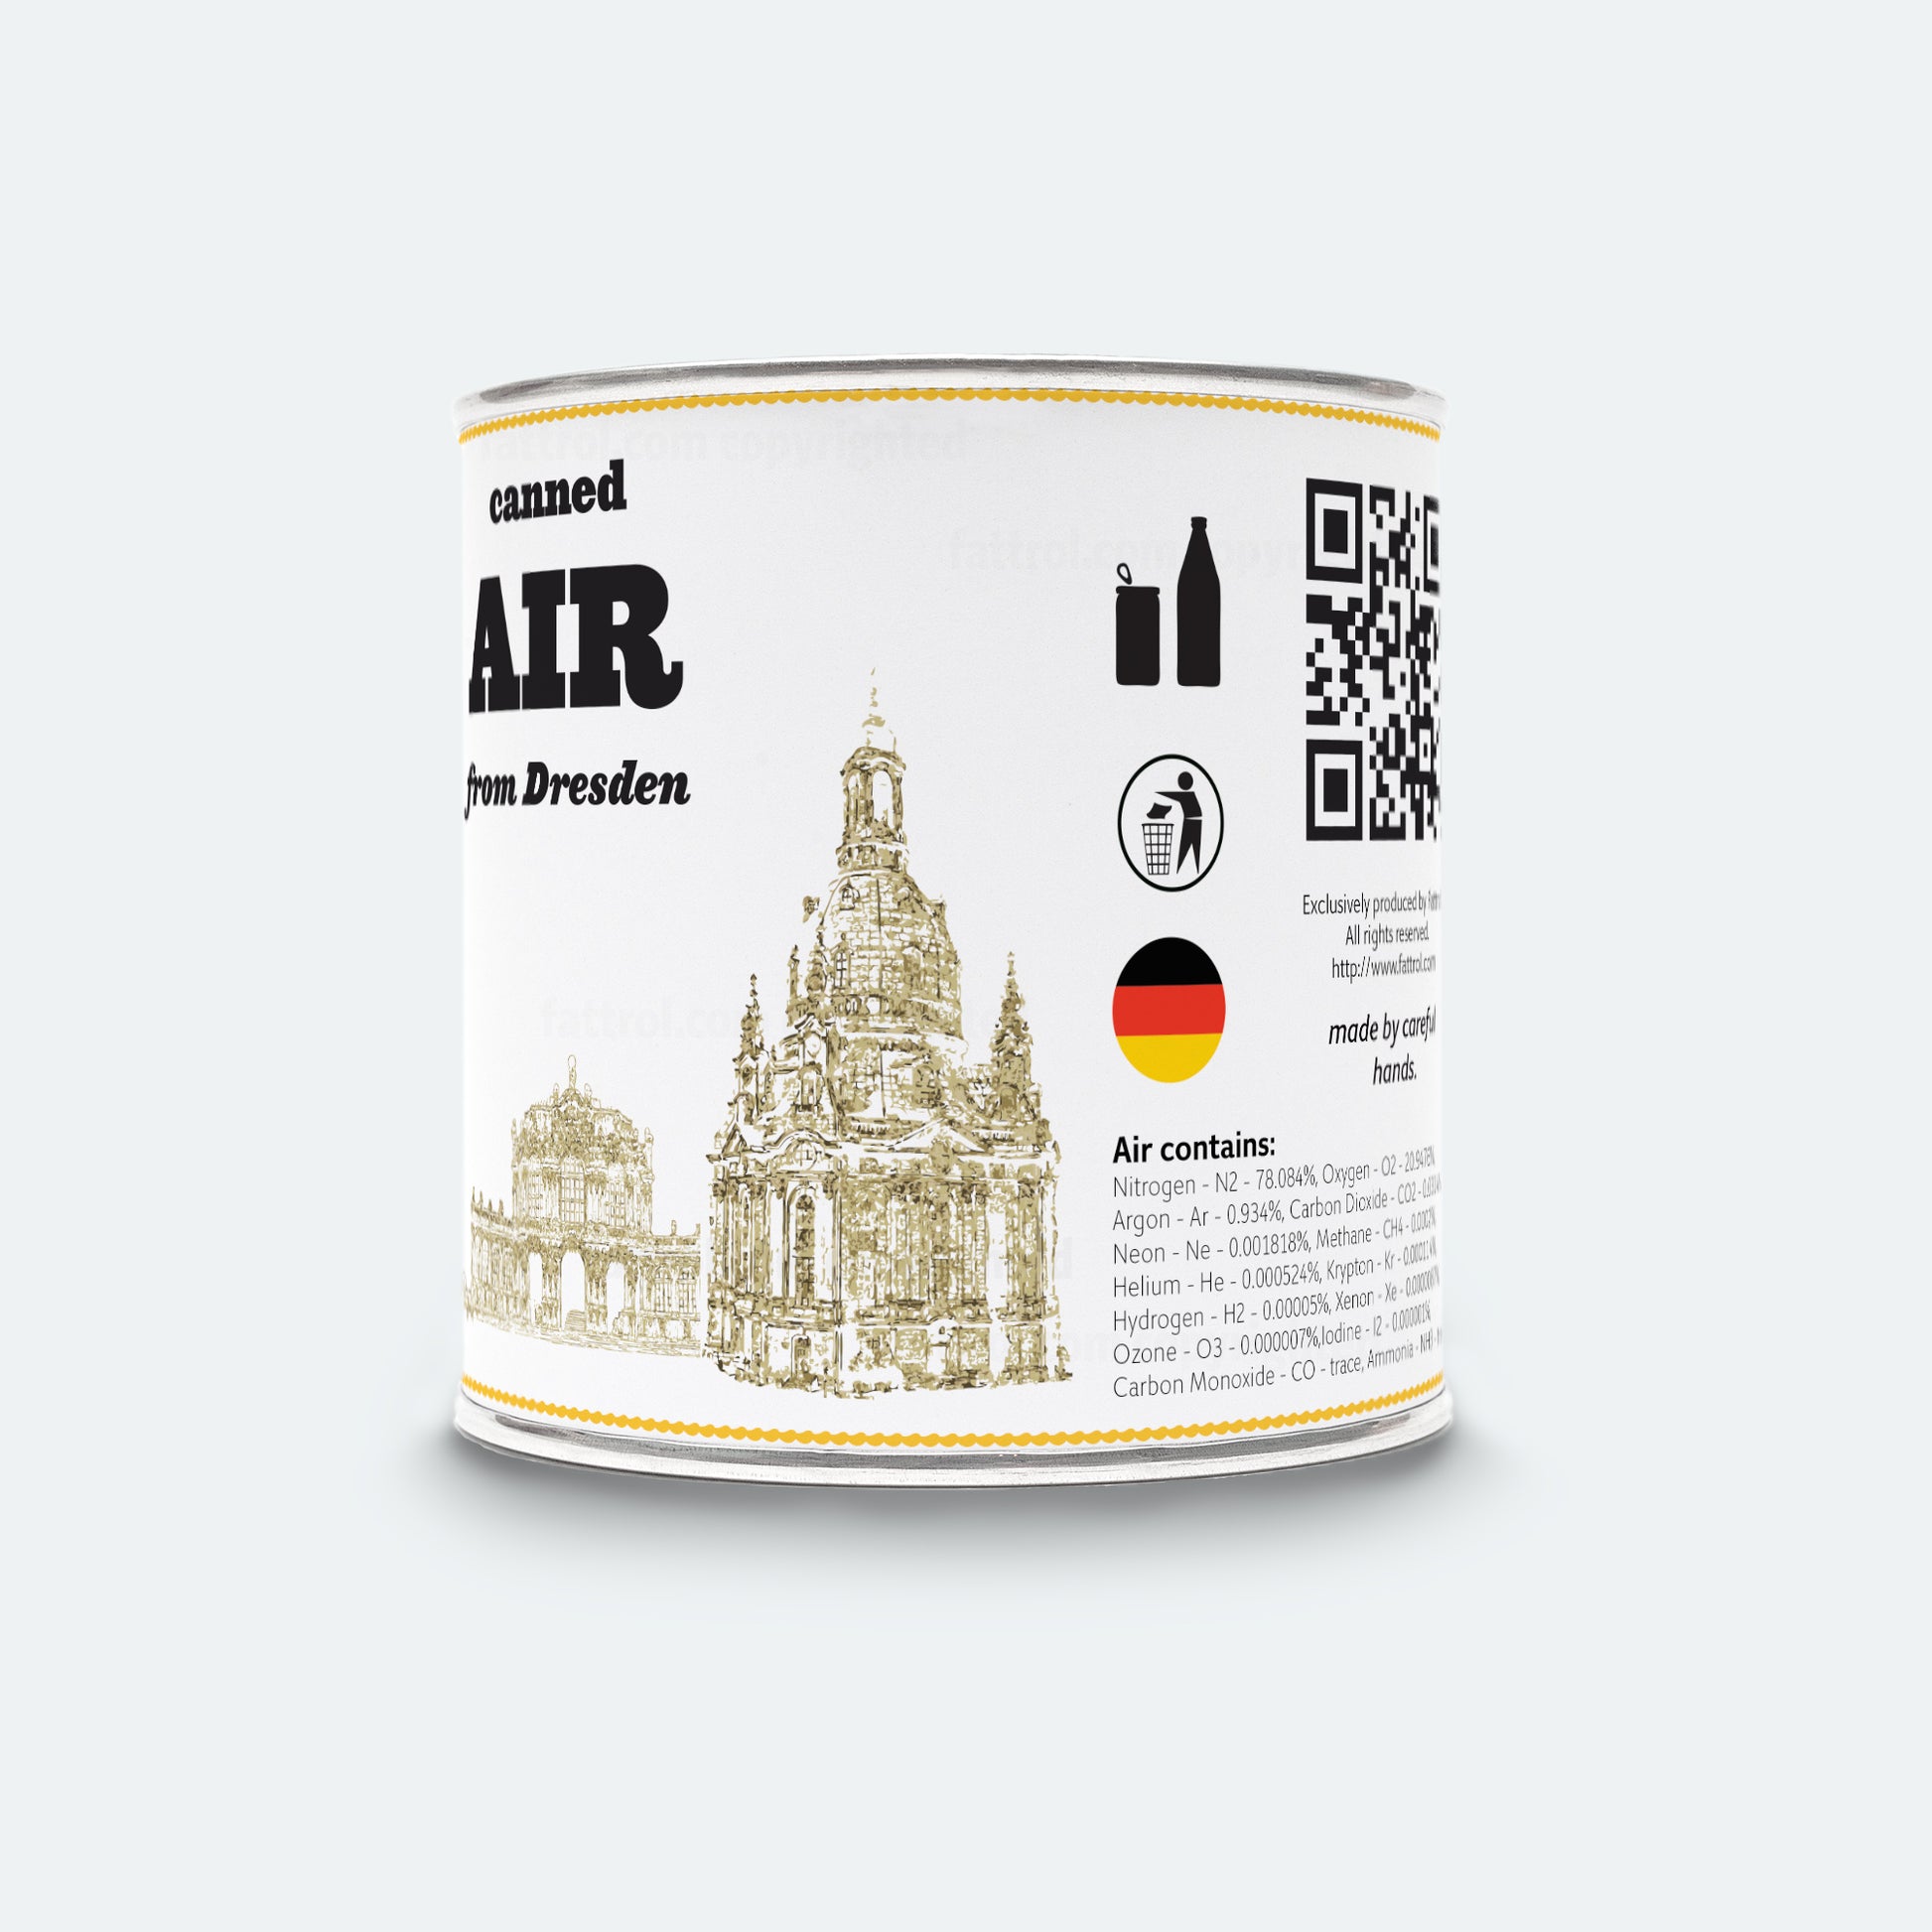 Canned Air from Dresden, Germany